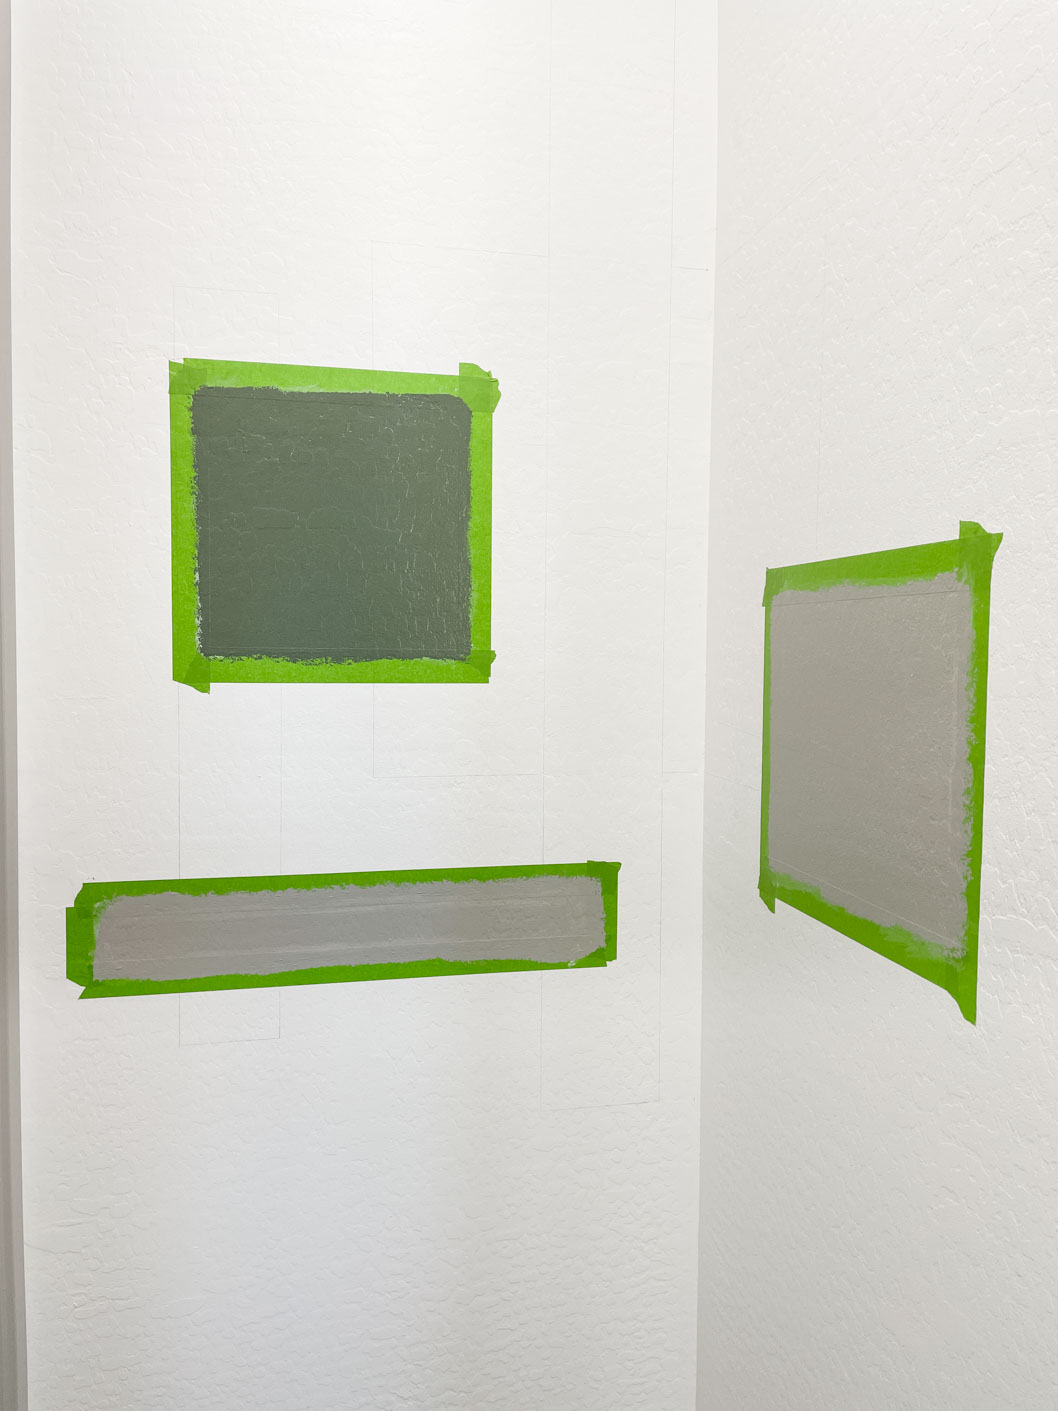 Using paint to create magic on a white wall with with green and gray paint.